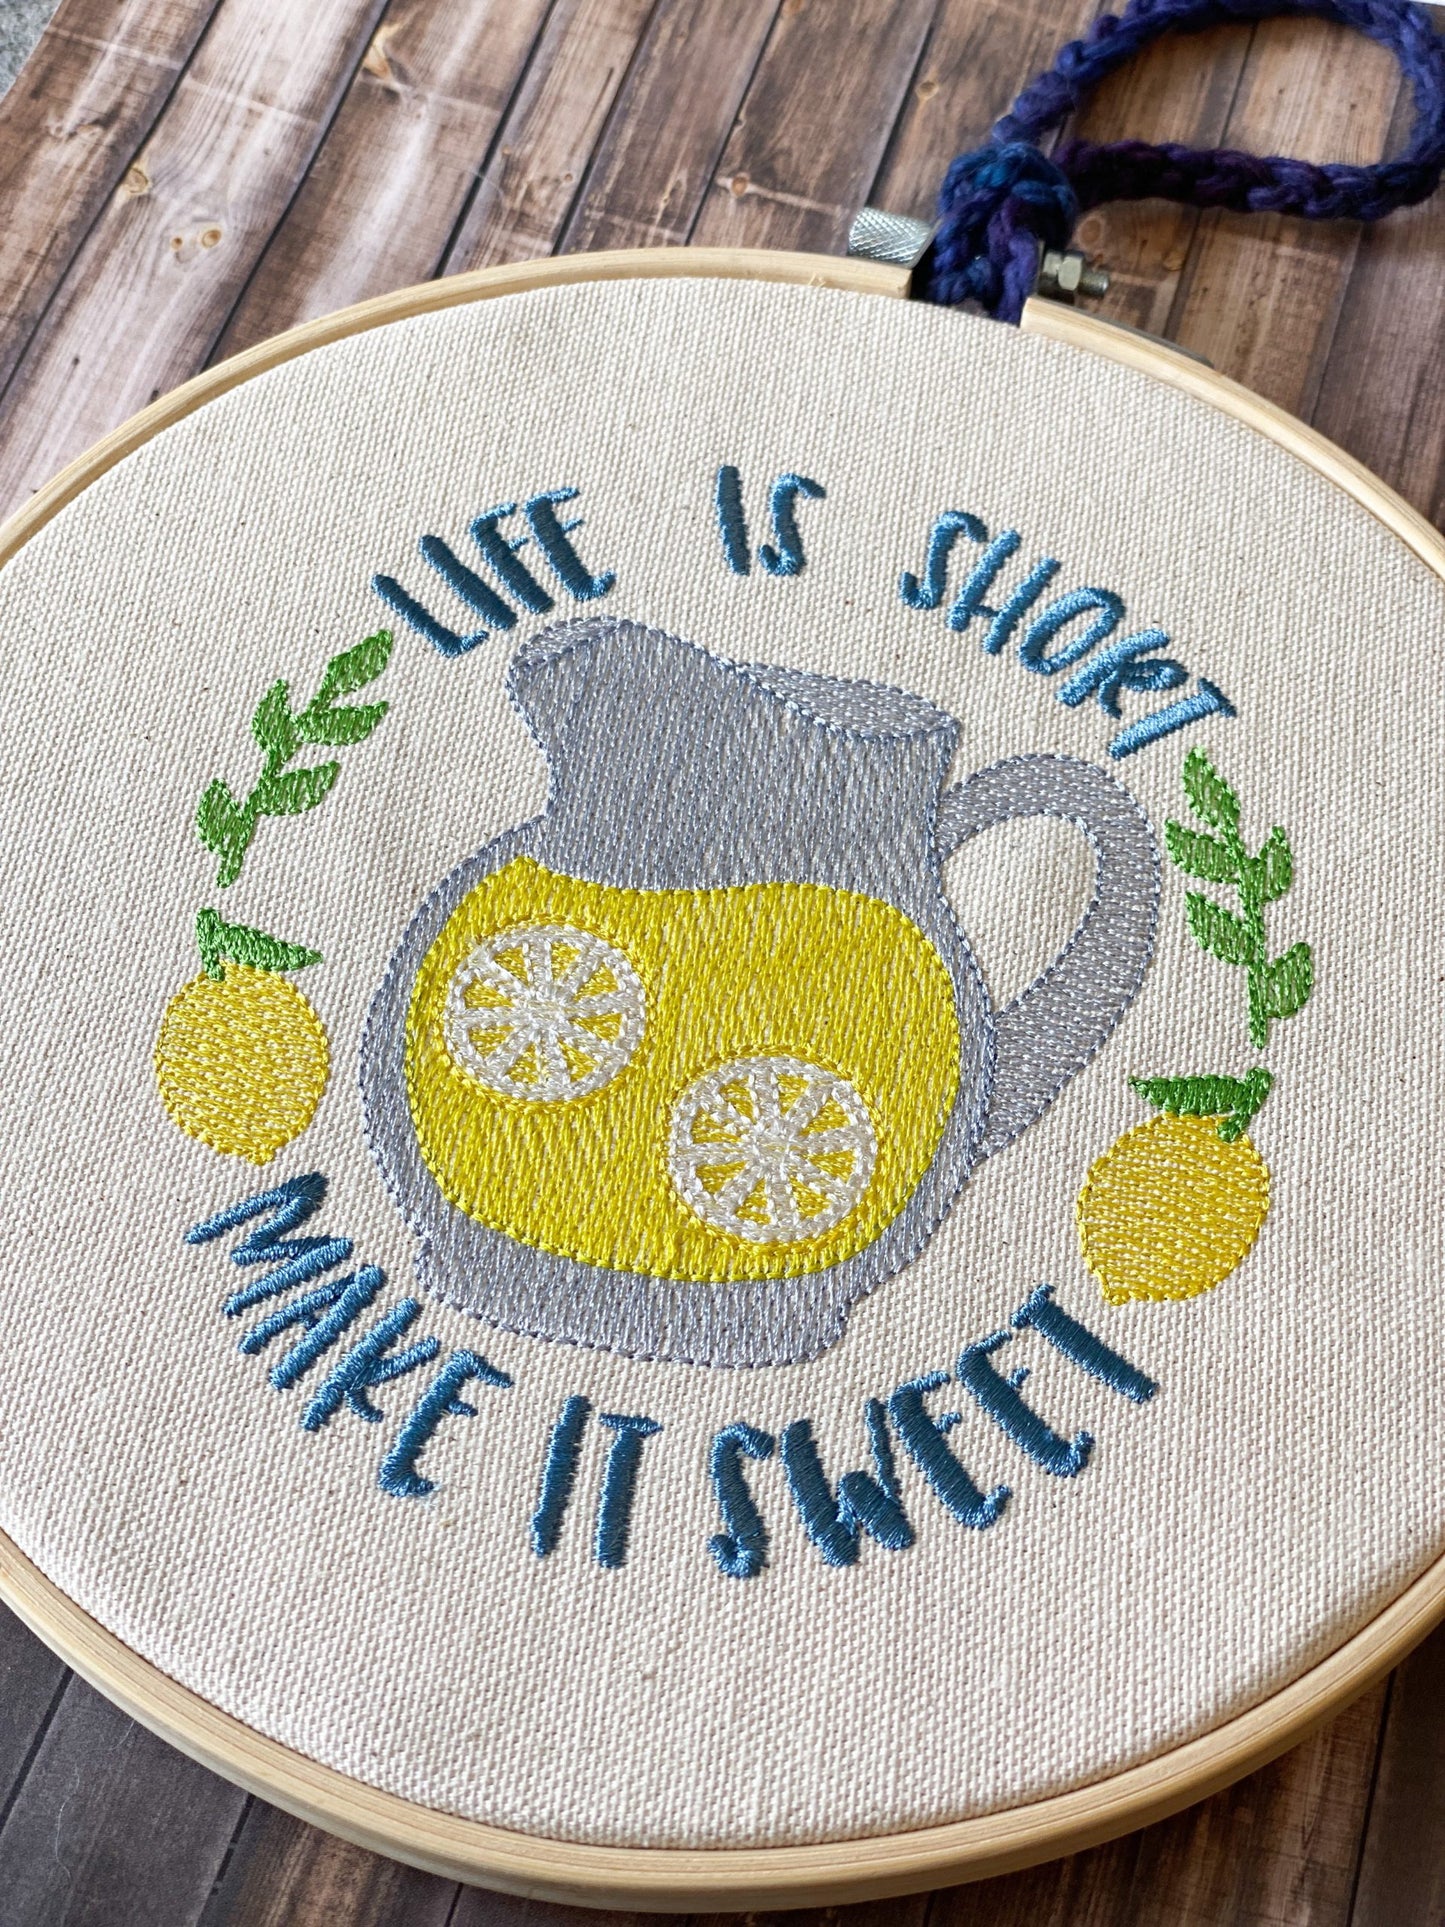 Life is Short - 3 sizes- Digital Embroidery Design